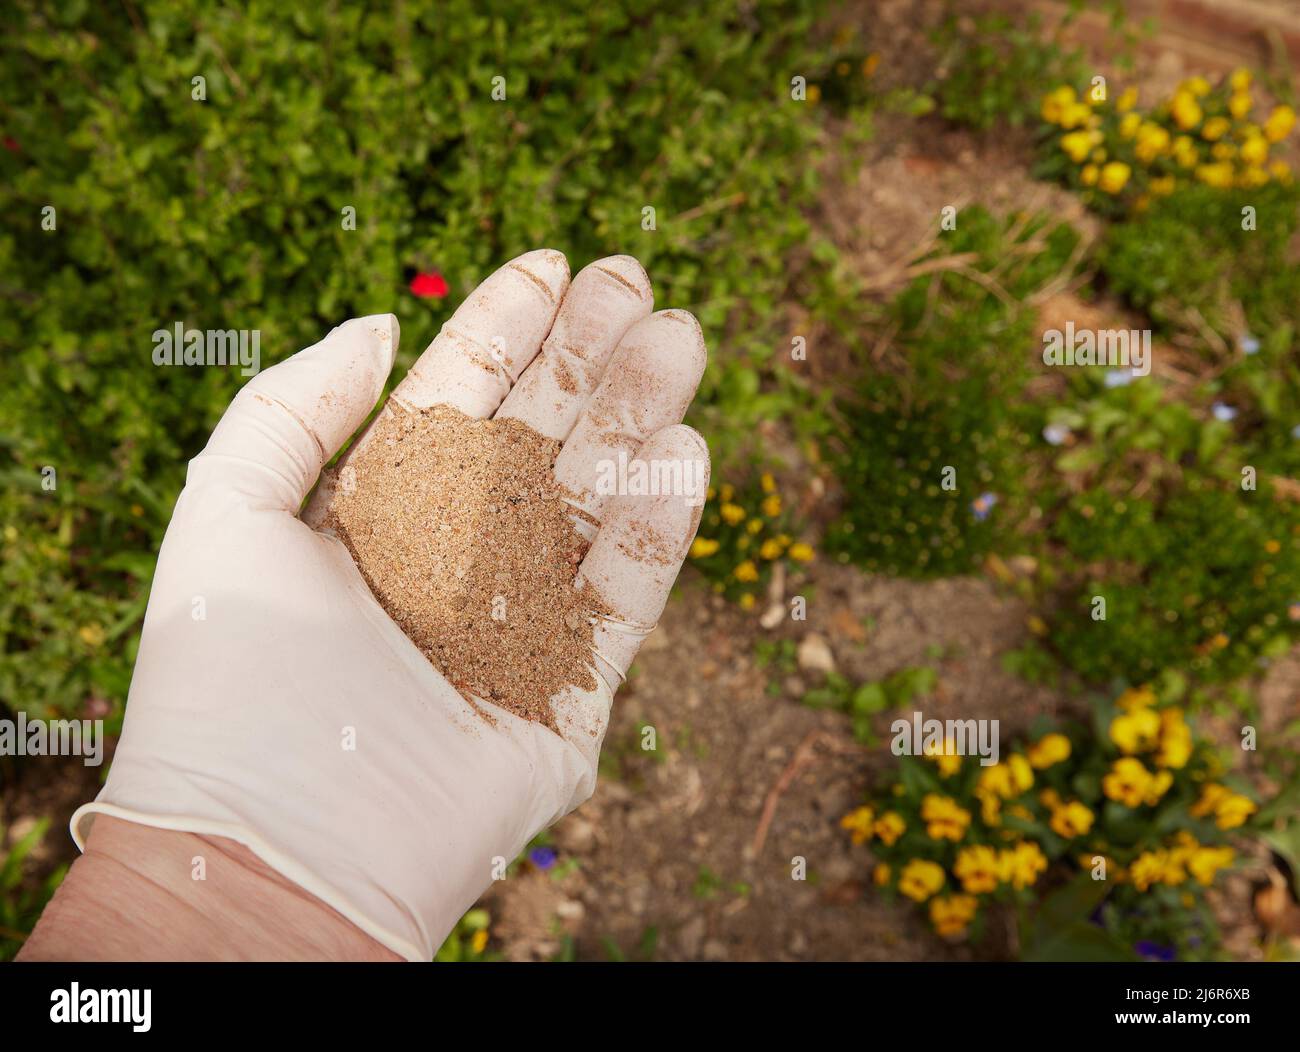 Handful of fish blood and bone meal fertiliser seen in the palm of a hand. Stock Photo